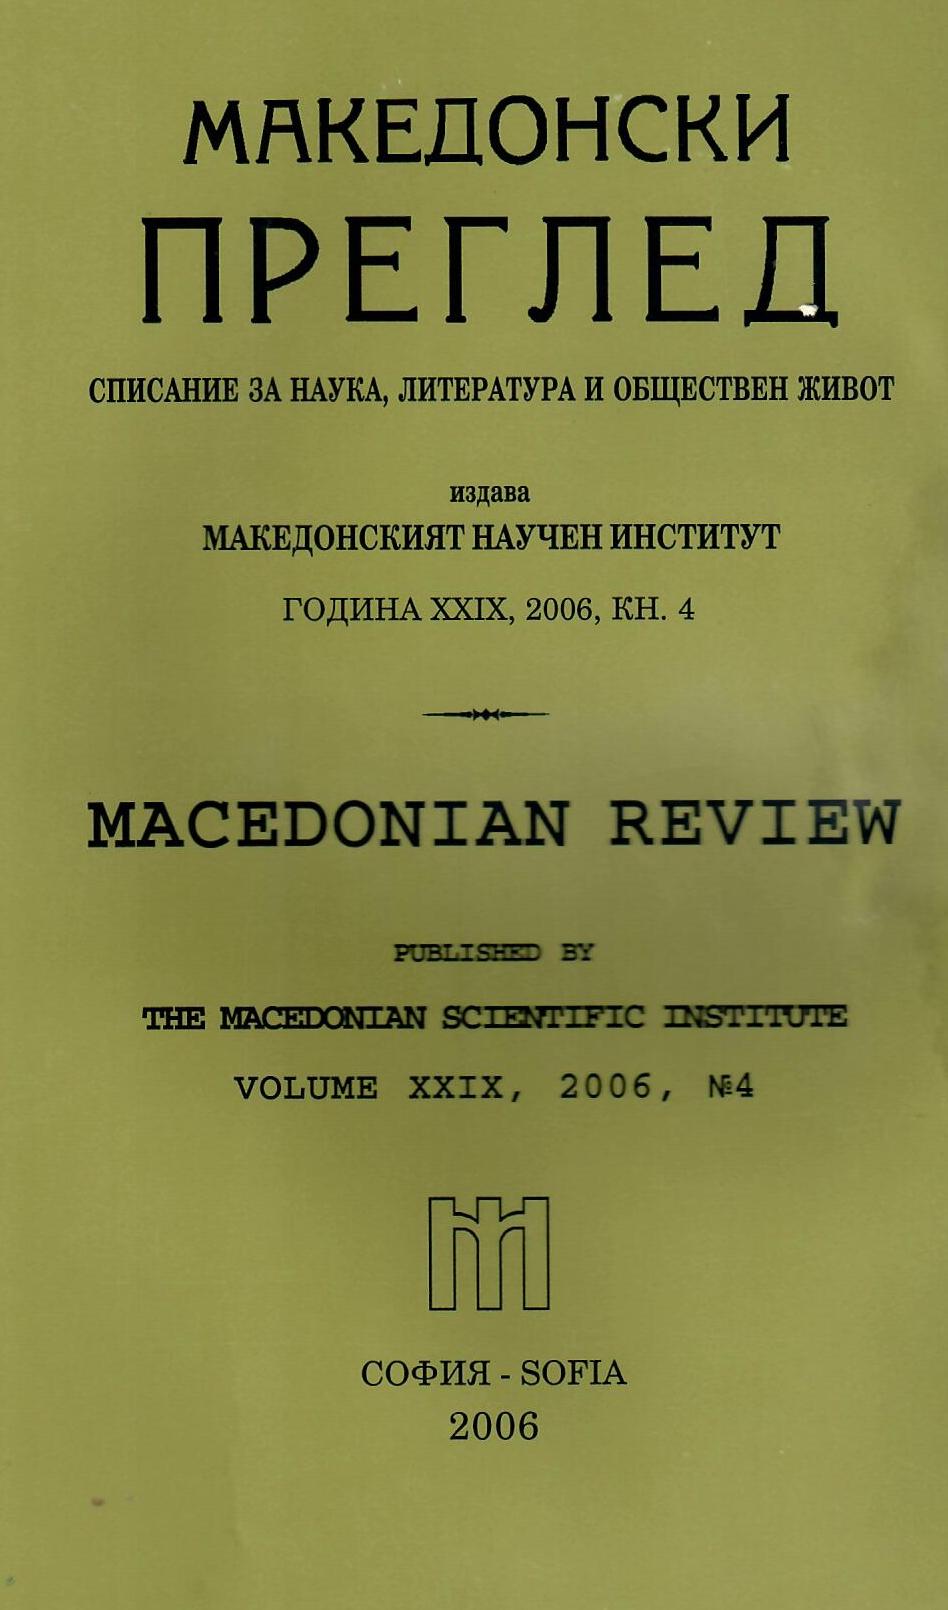 Dominic Murphy — a friend of the Bulgarians Cover Image